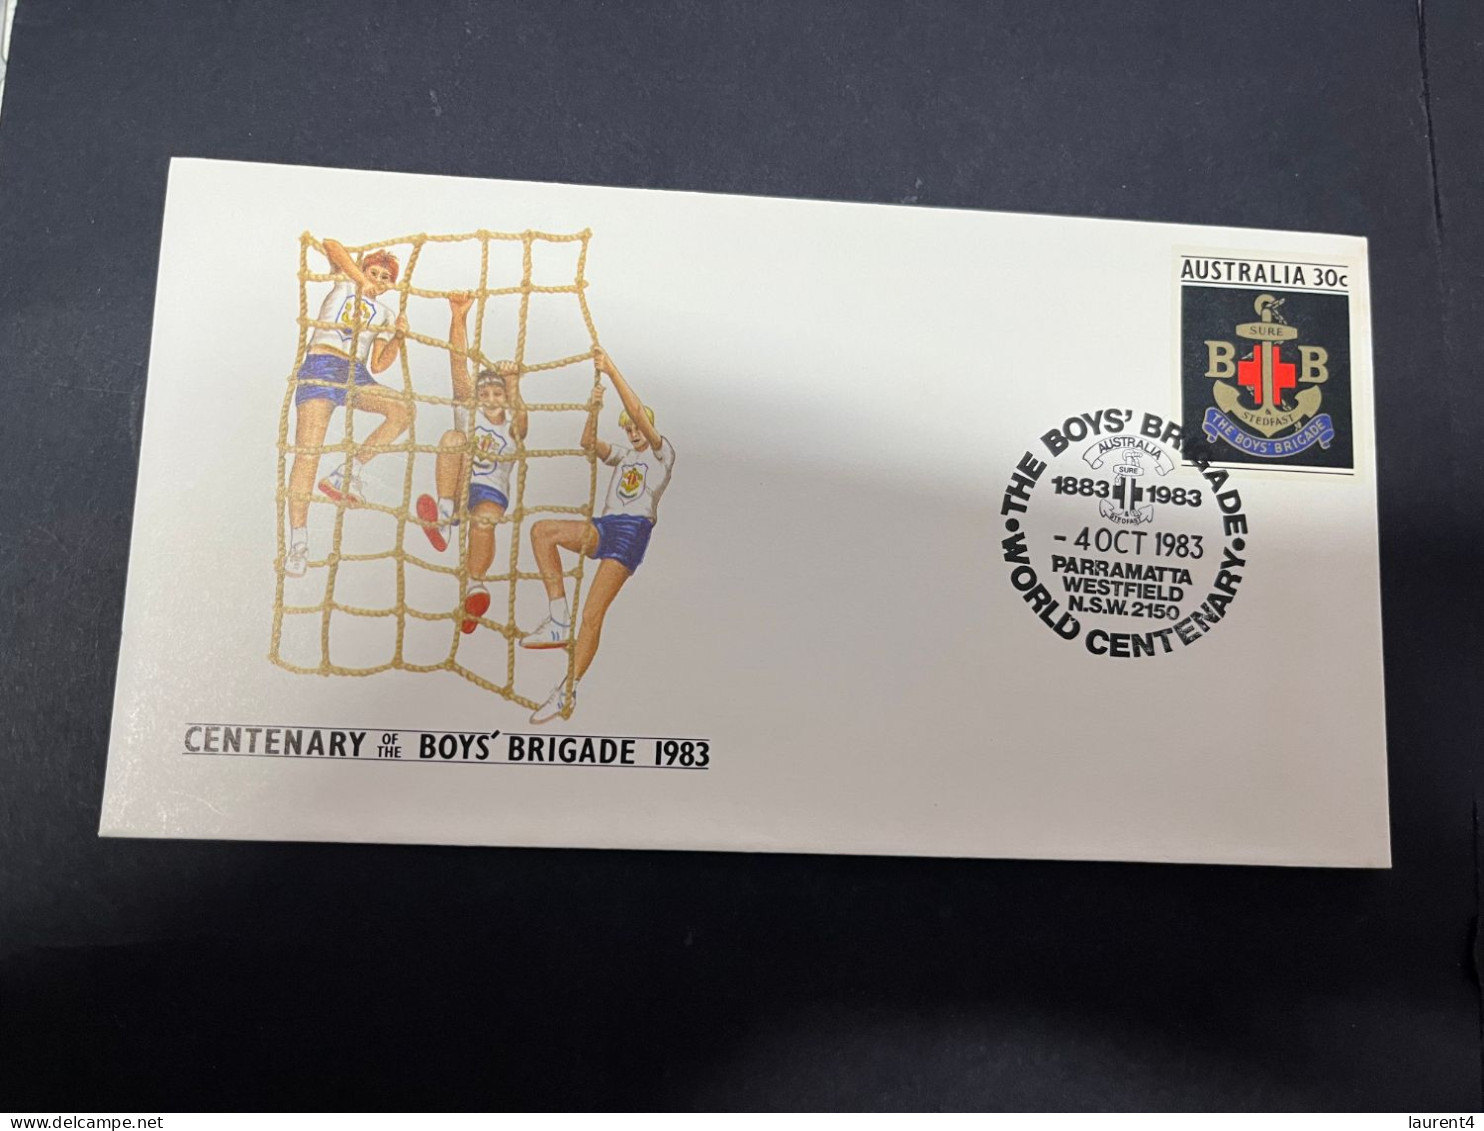 17-4-2024 (2 X 19) Australia - 1983 - Centenary Of The Boys' Brigade + SCOUTS + Canberra - 3 Covers - Ersttagsbelege (FDC)